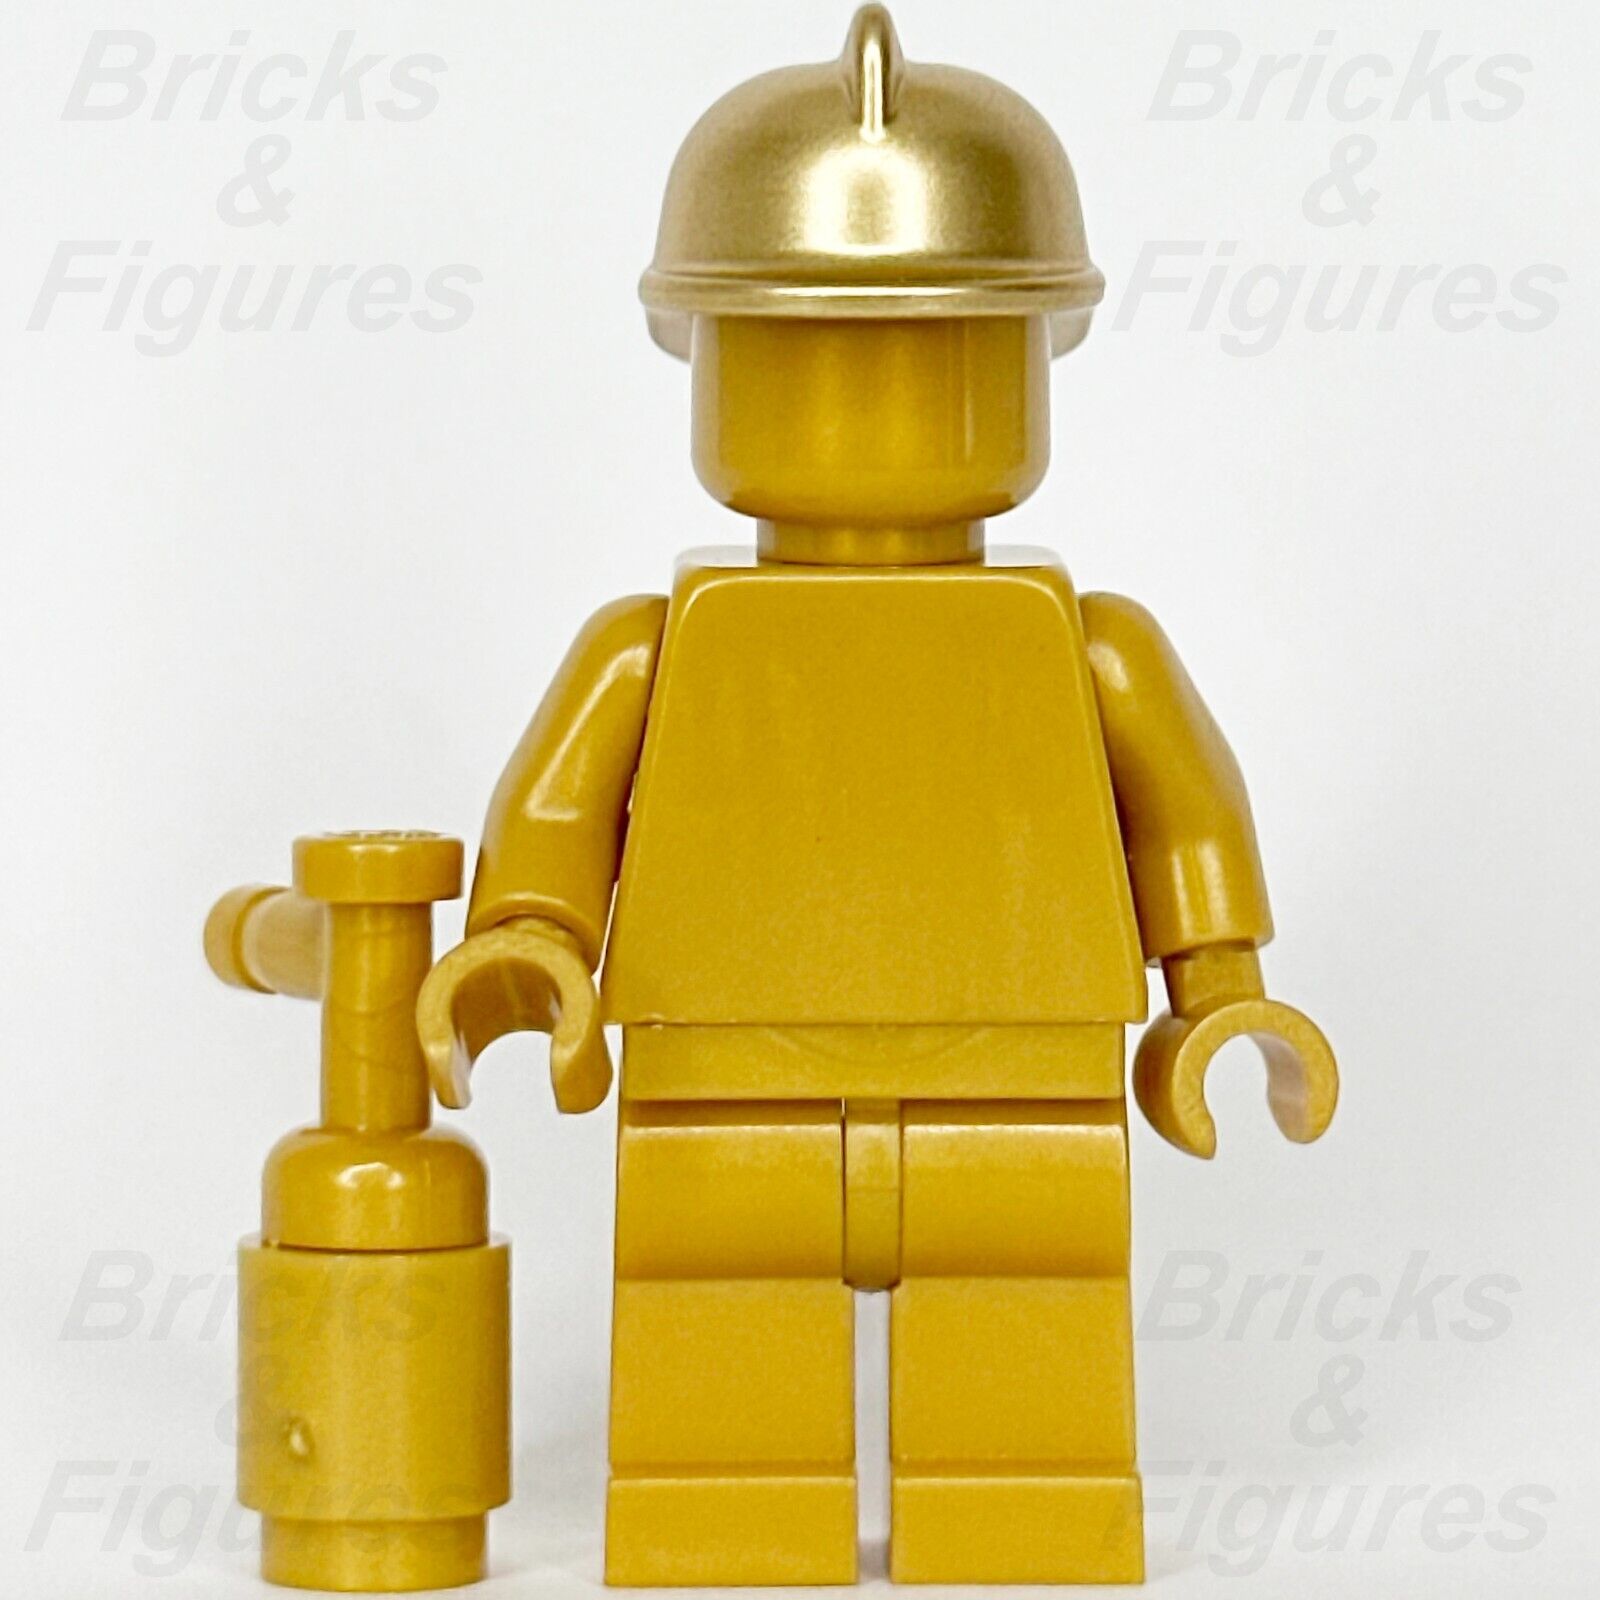 LEGO City Firefighter Gold Statue Minifigure Town Police 60207 cty0989 Fireman